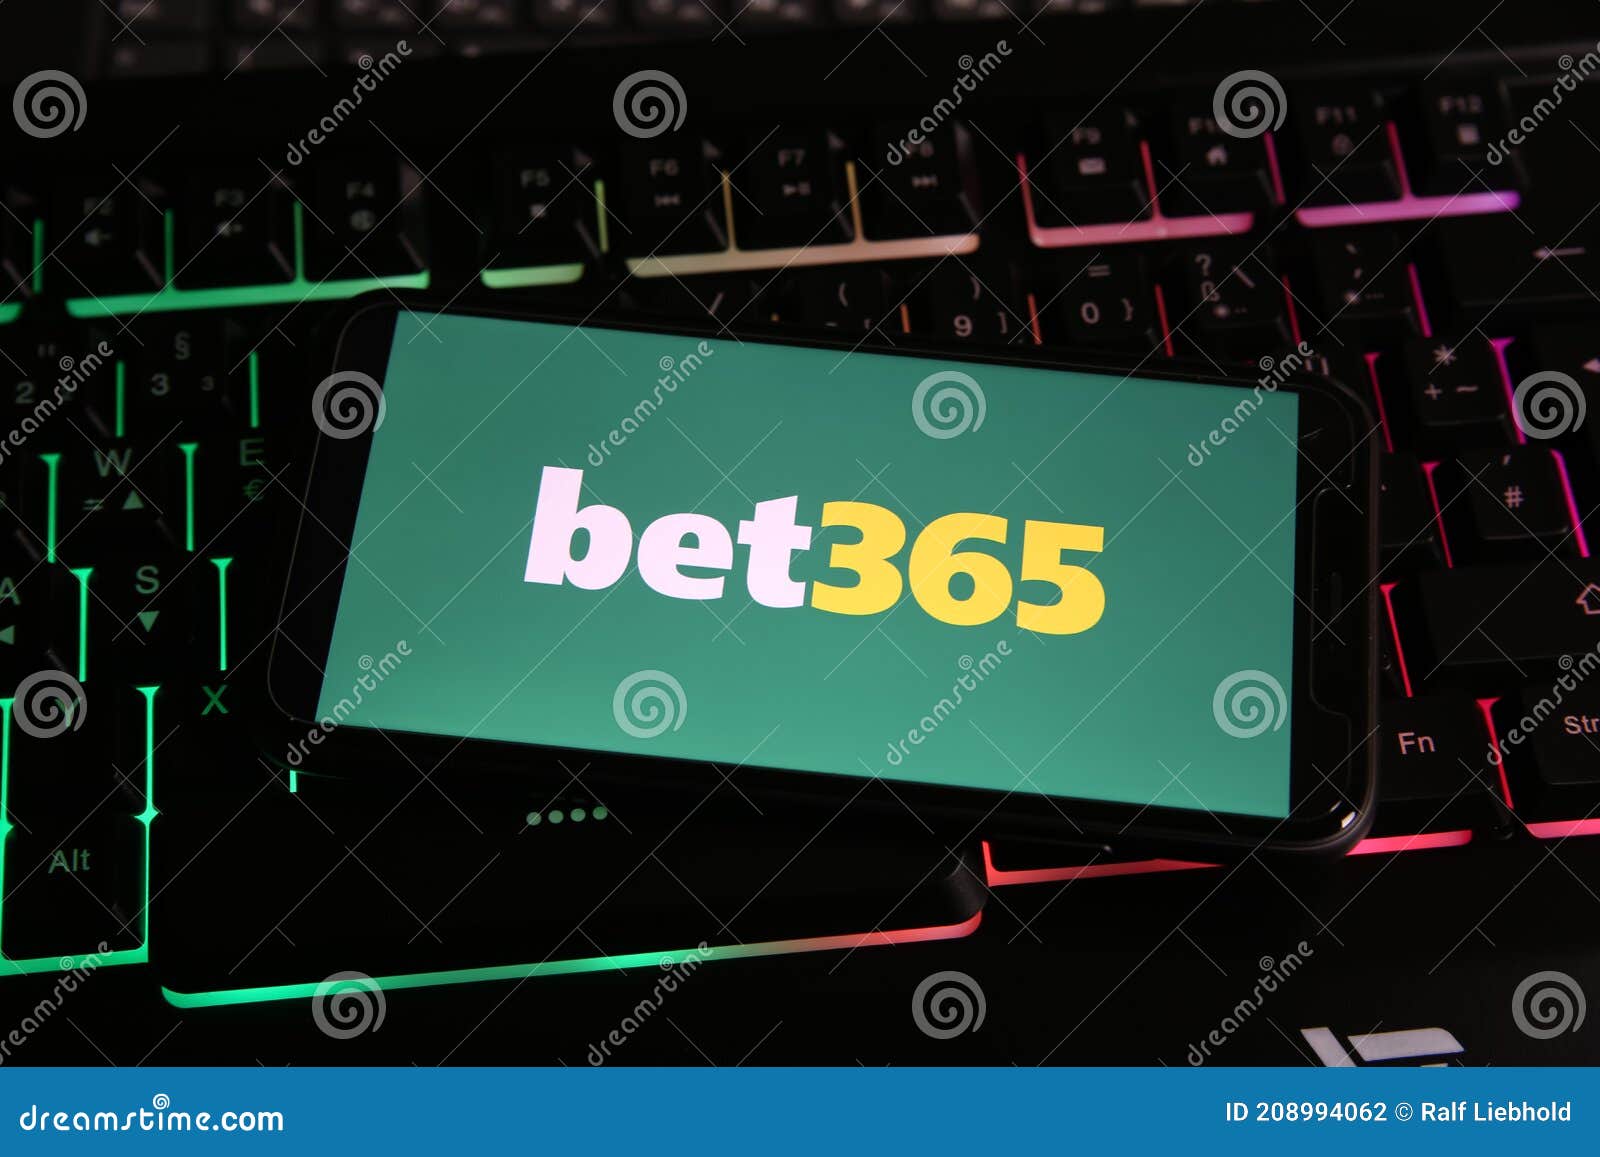 The Consequences Of Failing To bet365 casino When Launching Your Business